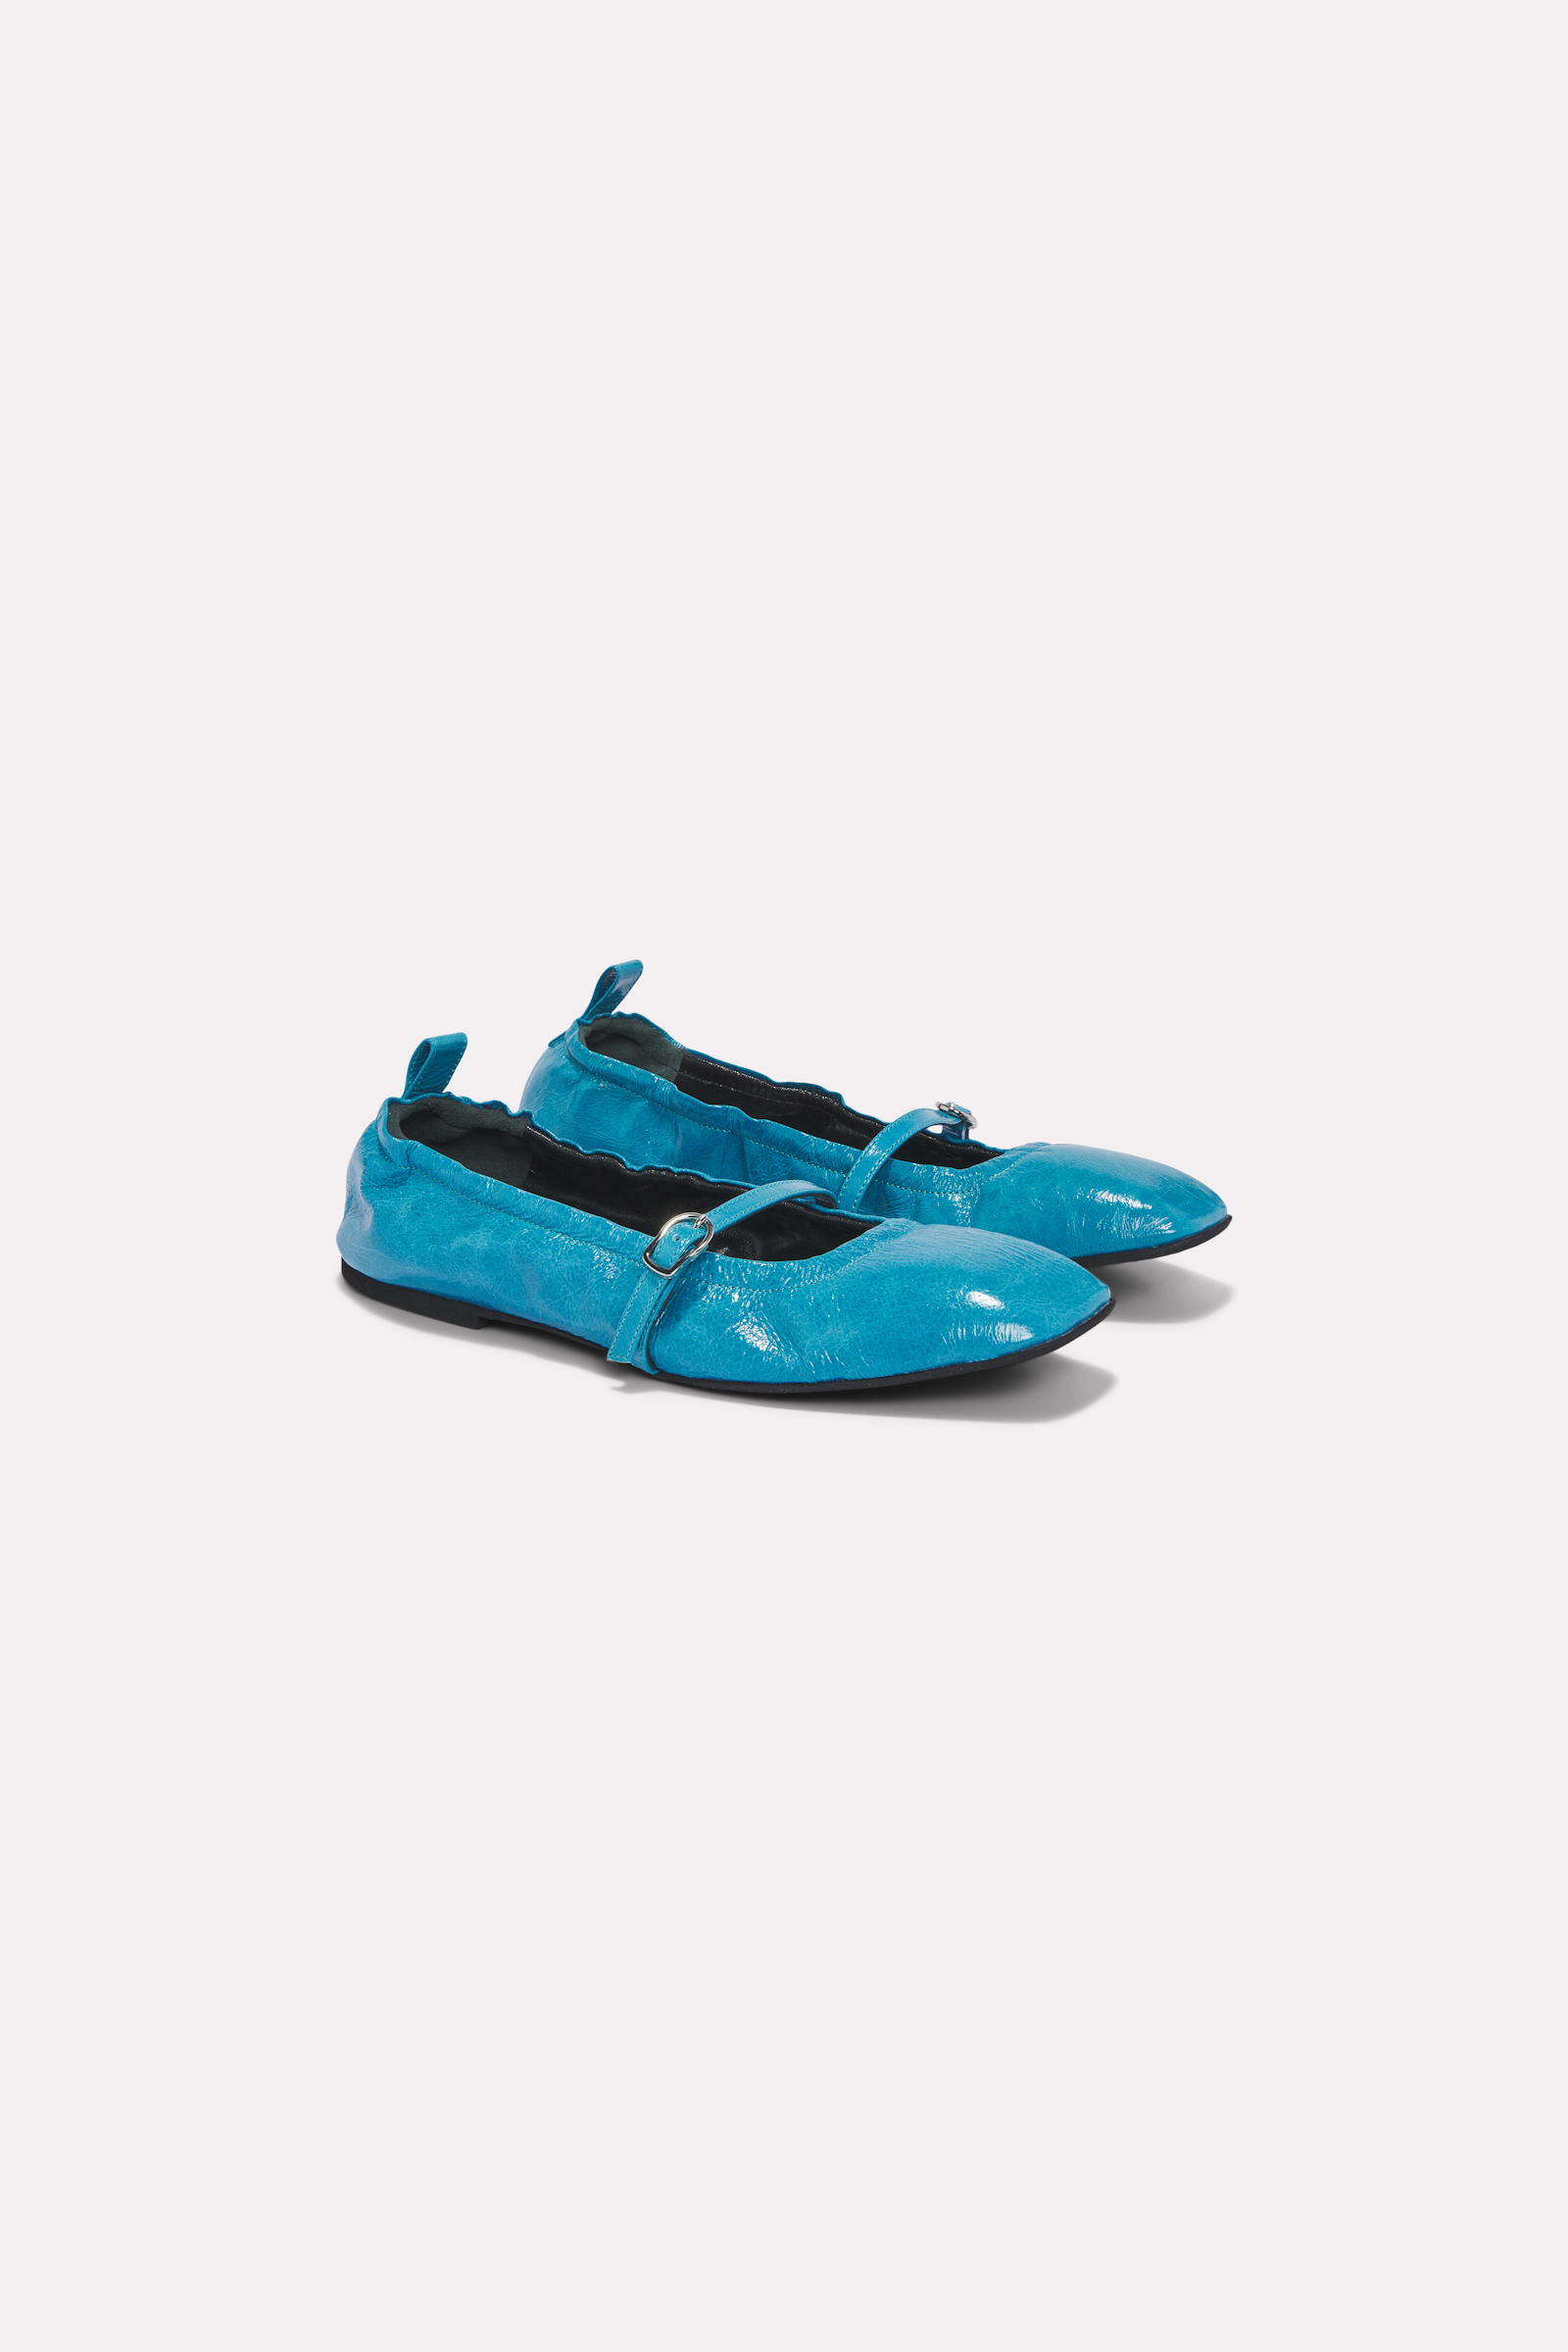 Dorothee Schumacher Square toe foldable ballerinas with buckle impulsive blue